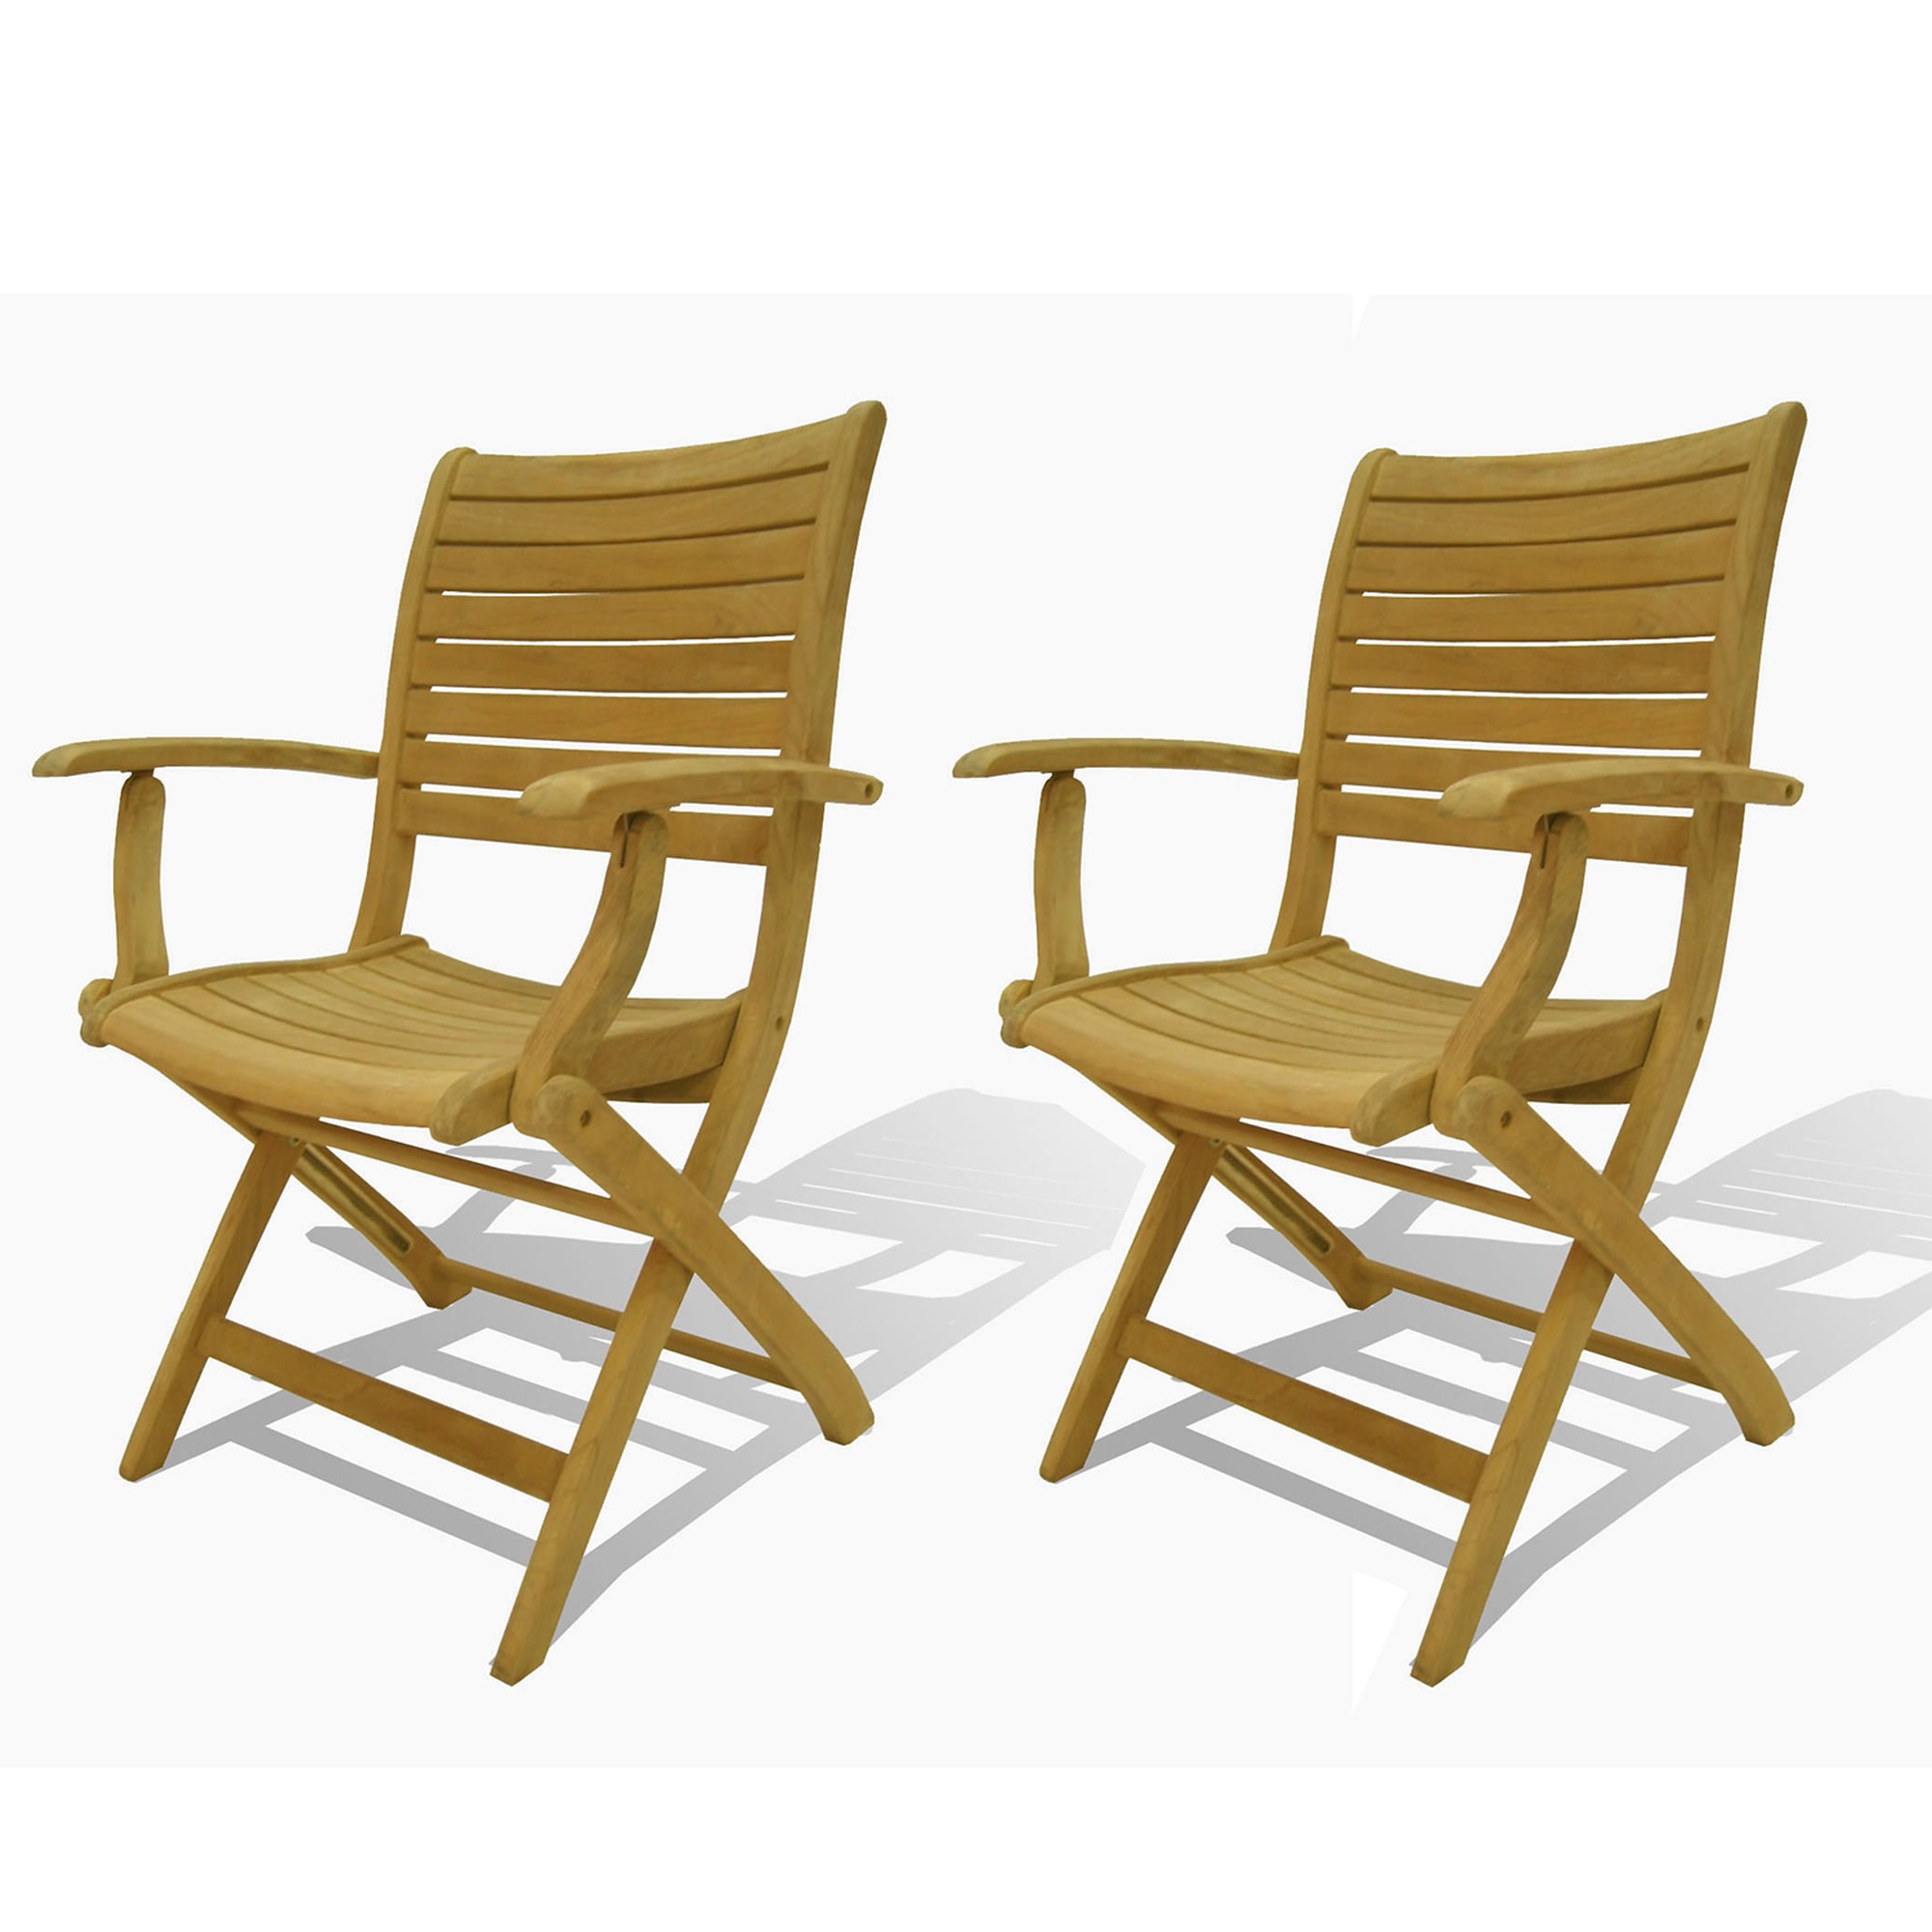 Outdoor Living and Style 2-Piece Brown Dublin Teak Patio Folding Armchair Set 35" - image 1 of 3